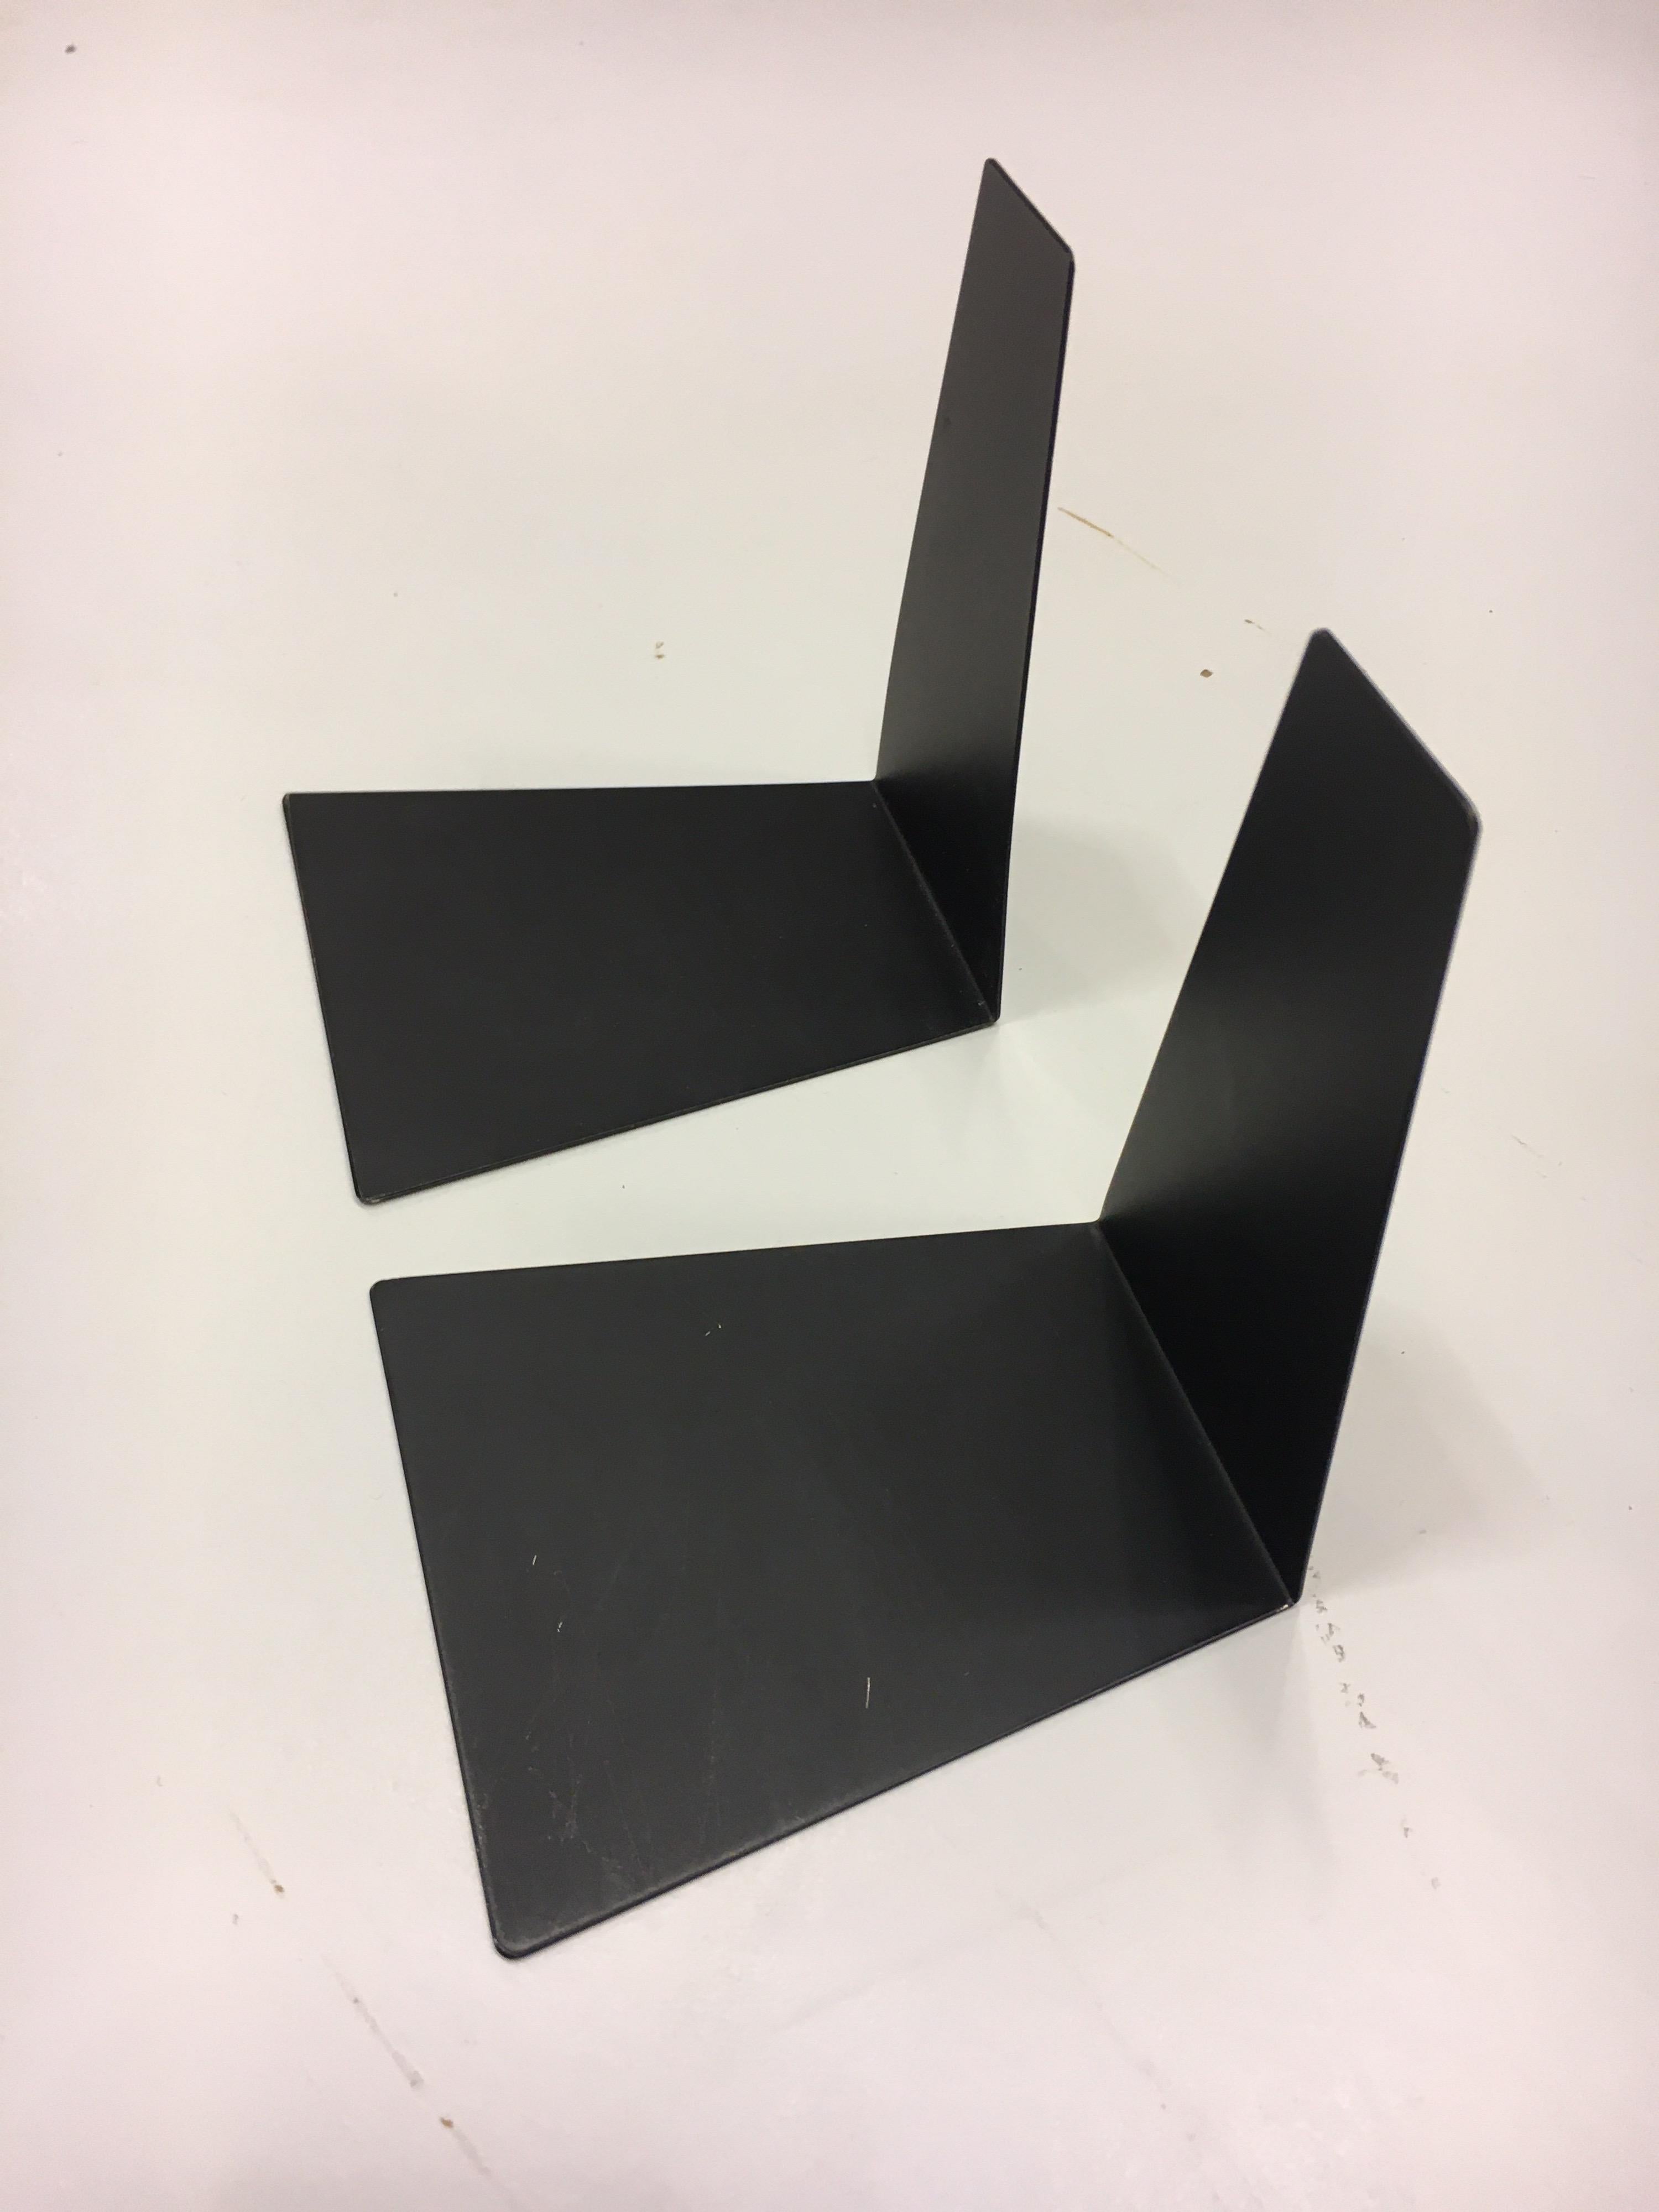 Mid-20th Century Bauhaus Black Metal Bookends by Marianne Brandt, 1930s for Ruppel, Germany